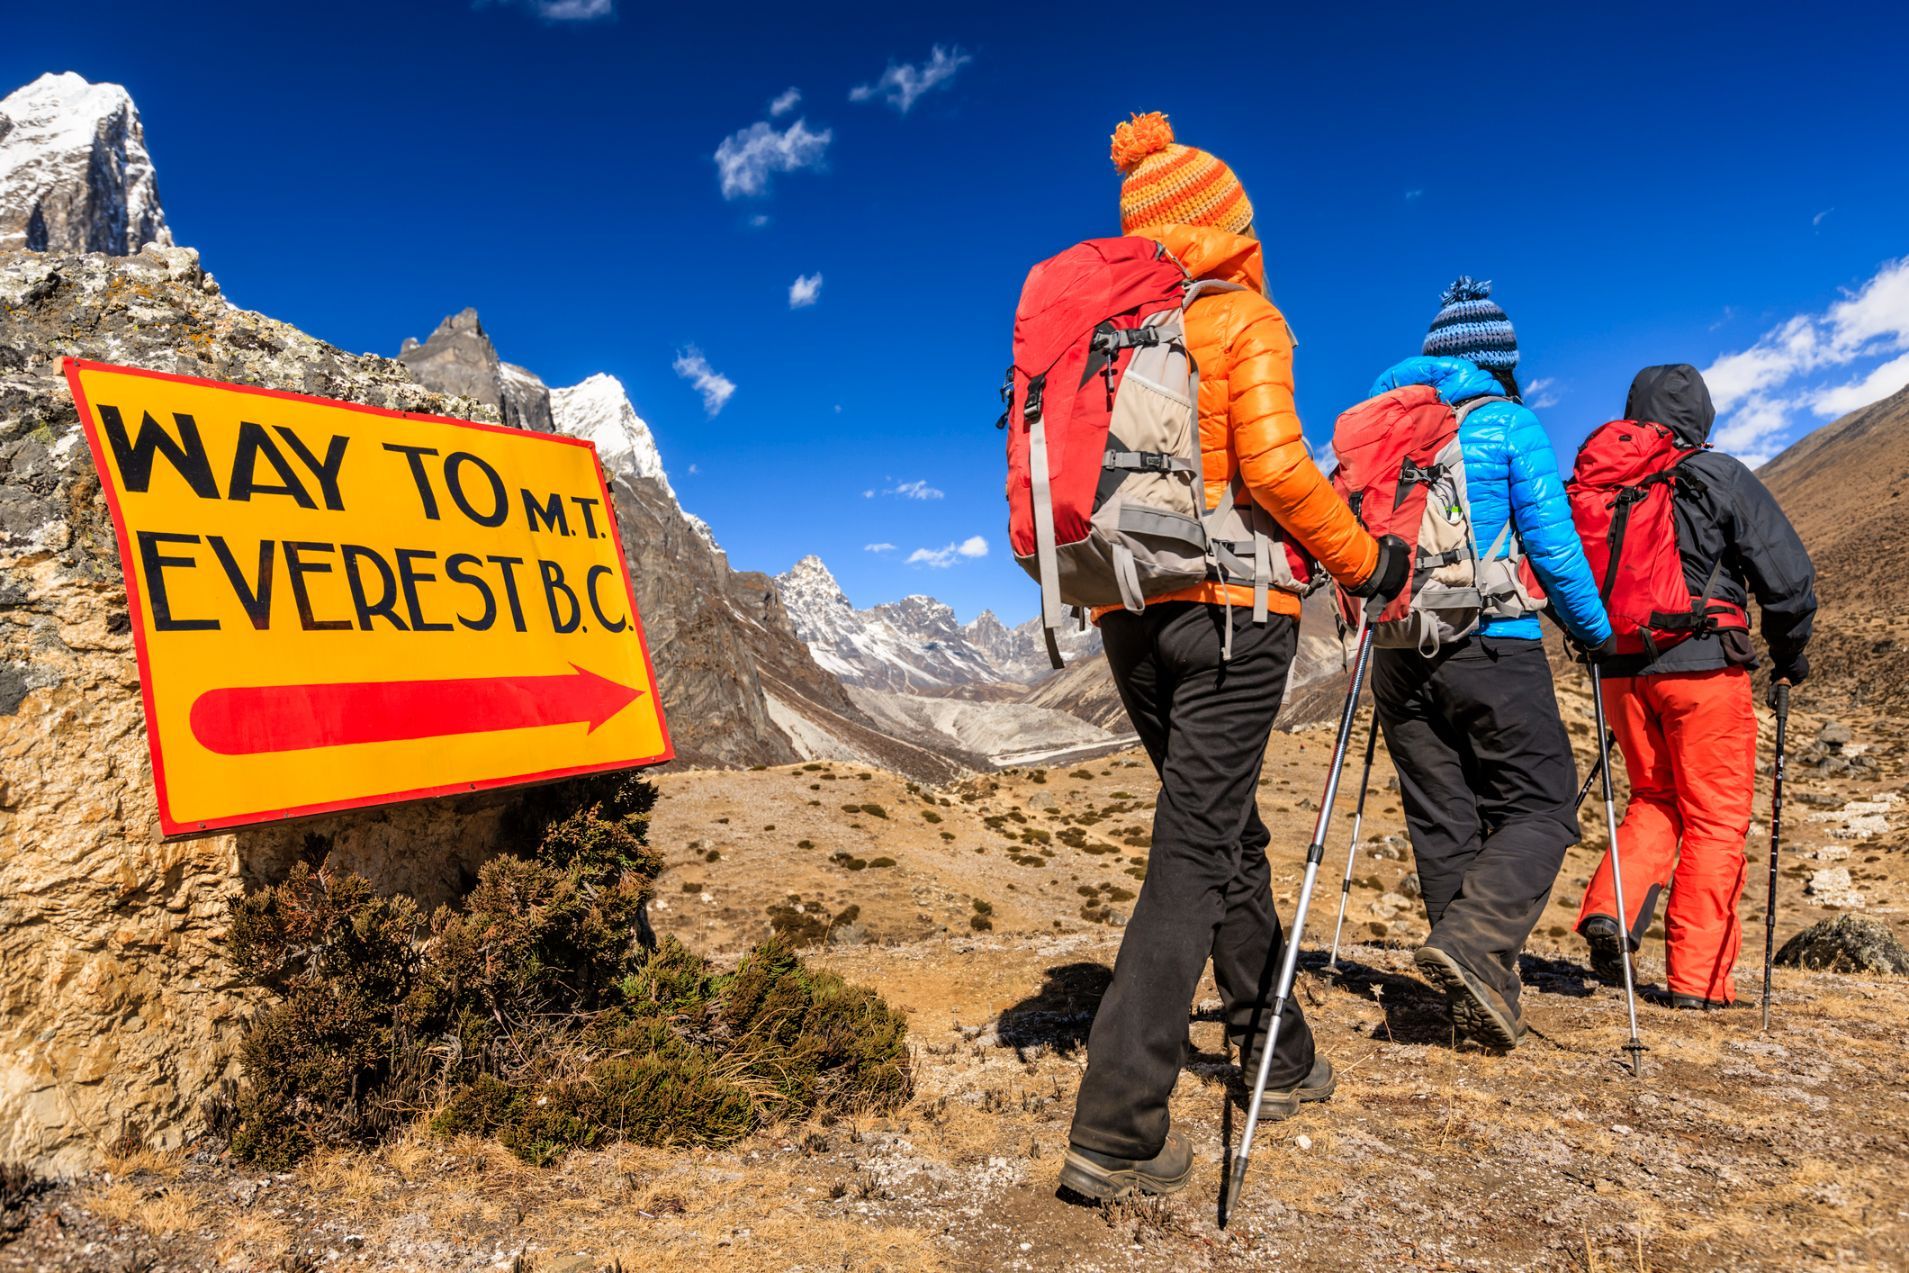 The sign for Everest Base Camp, and three hikers walking in the direction of its arrow.